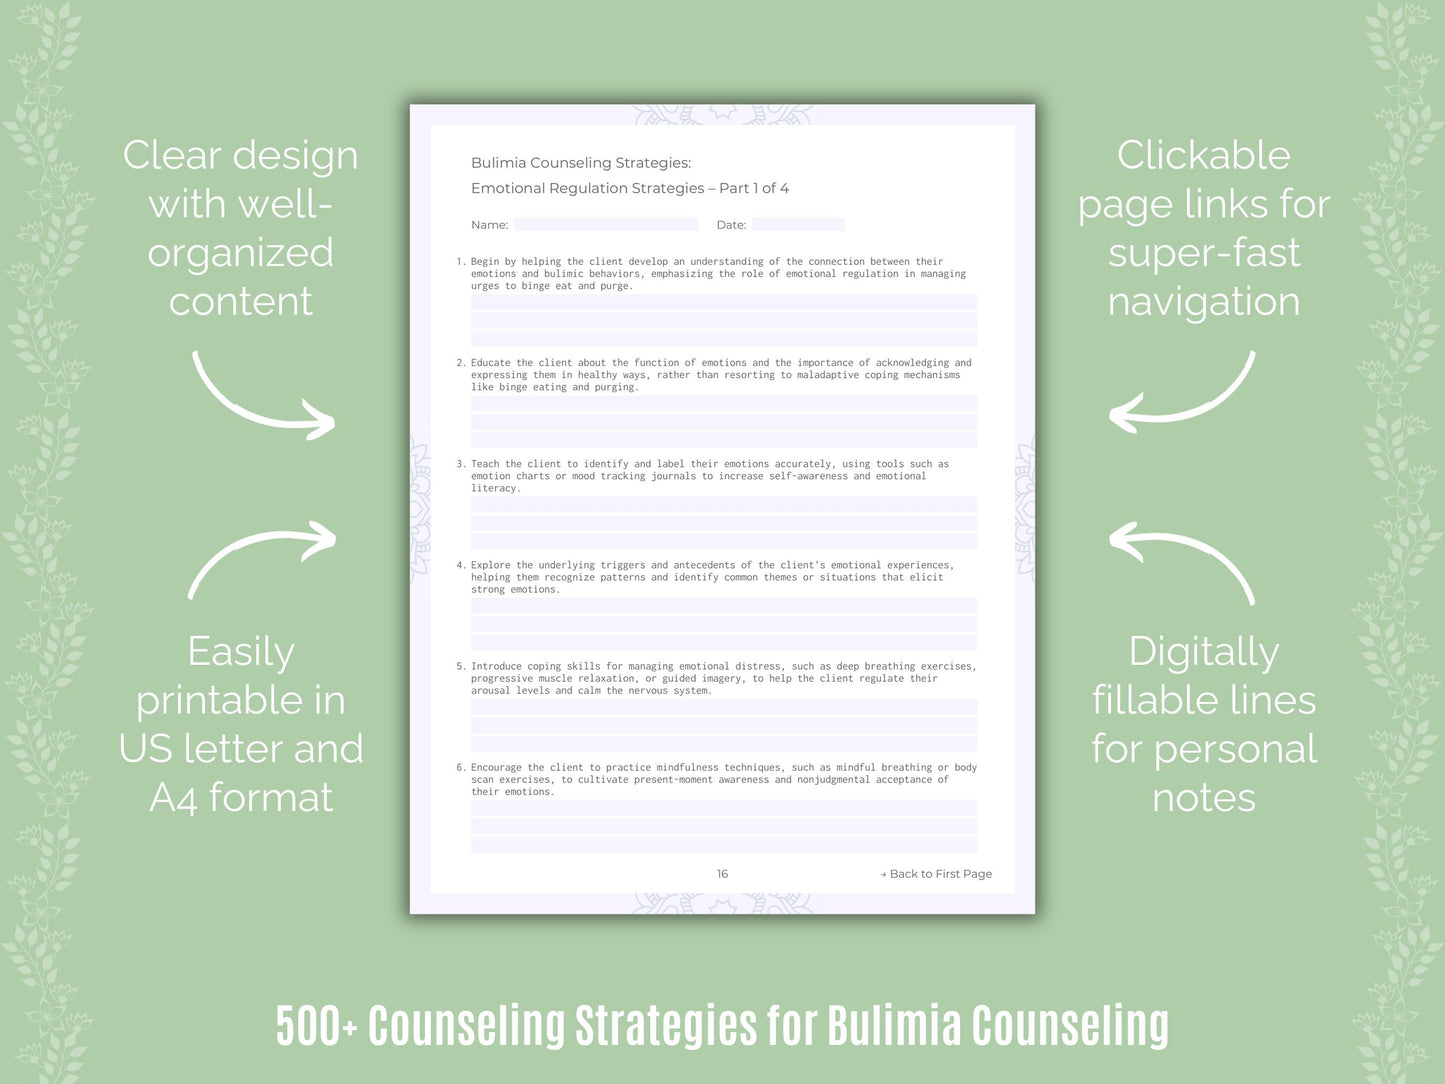 Bulimia Counseling Strategies Resource